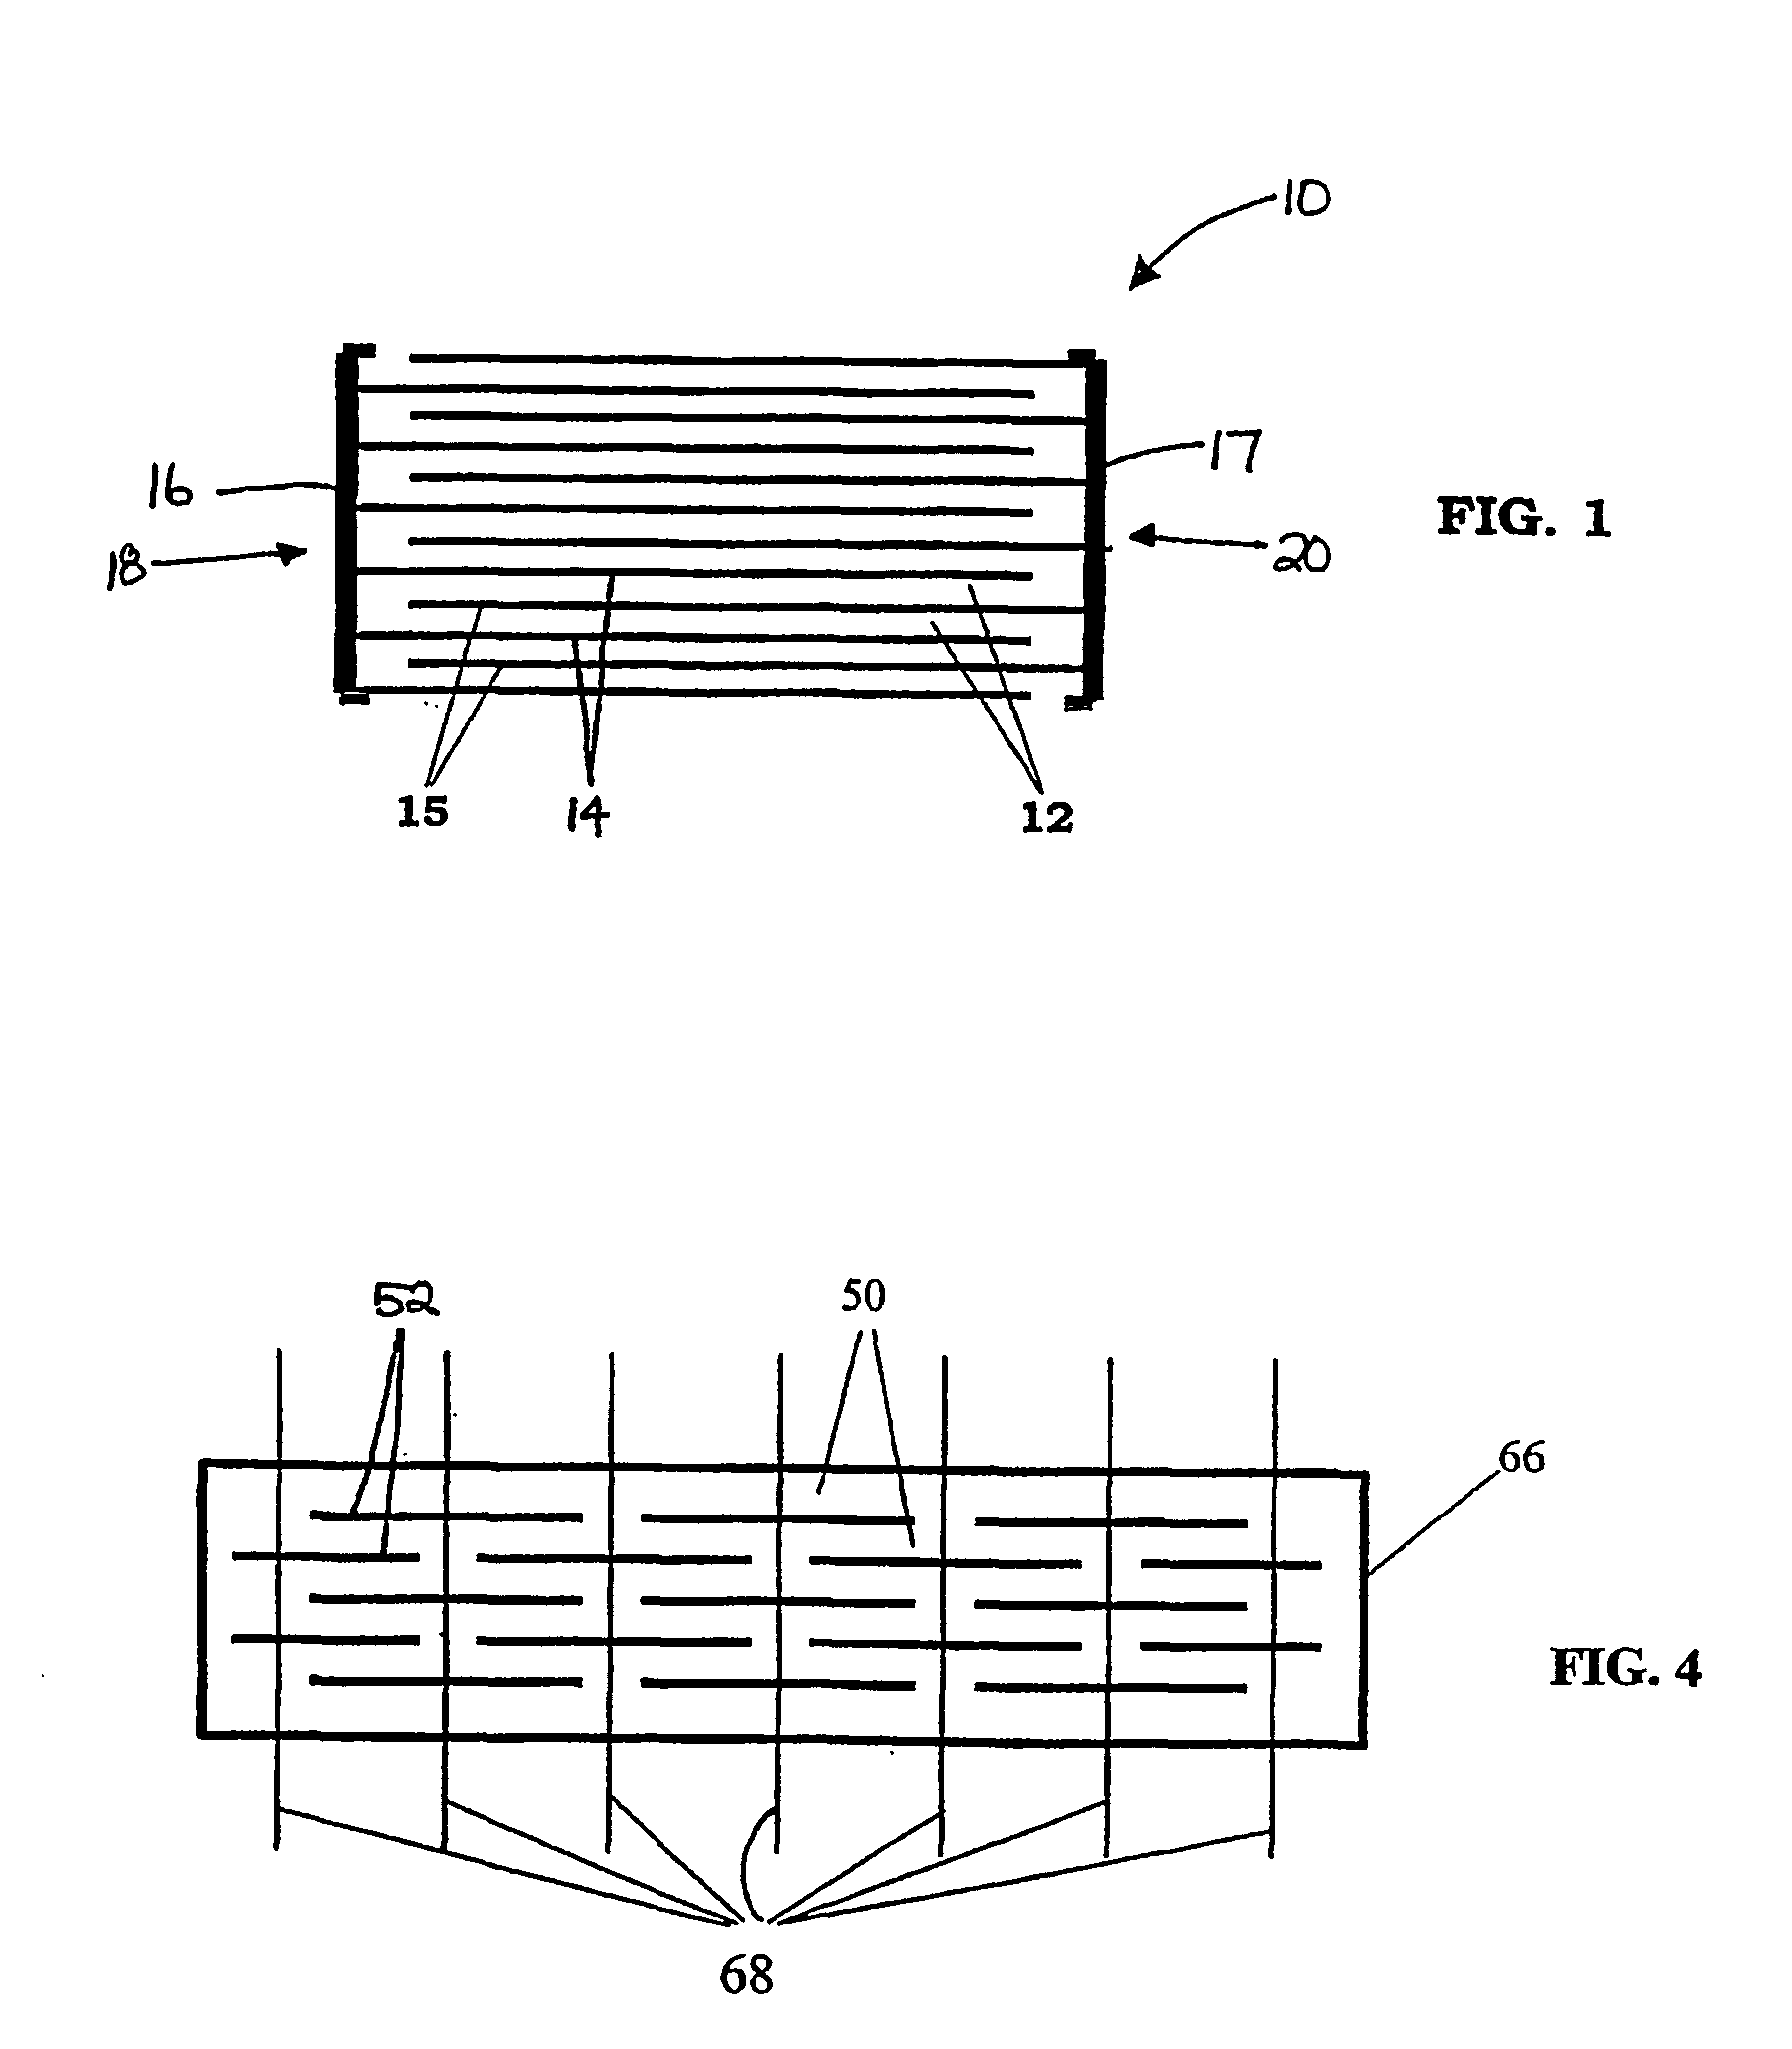 Ceramic components having multilayered architectures and processes for manufacturing the same